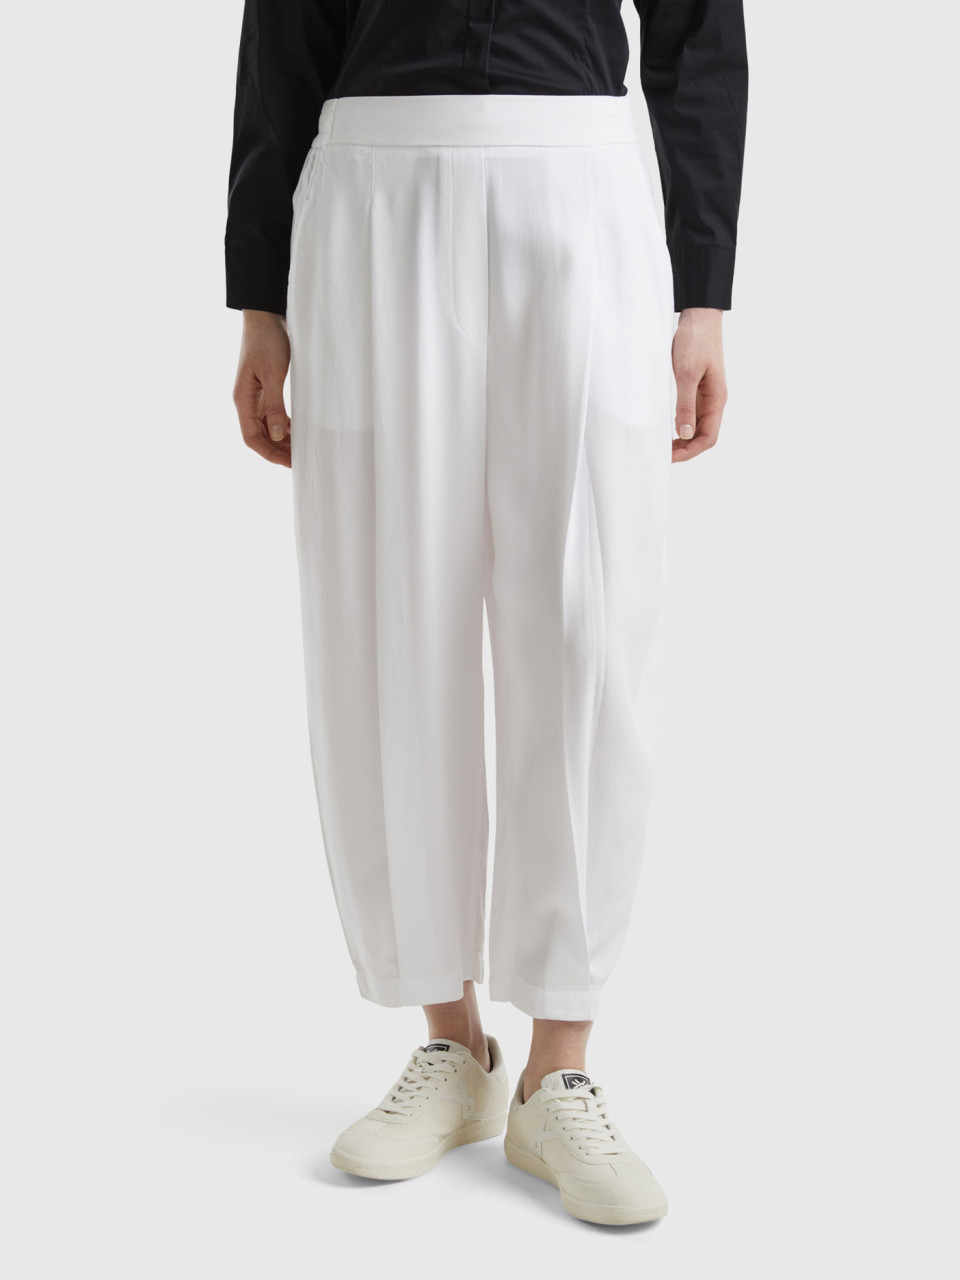 Benetton, Cropped Trousers With Pleats, White, Women